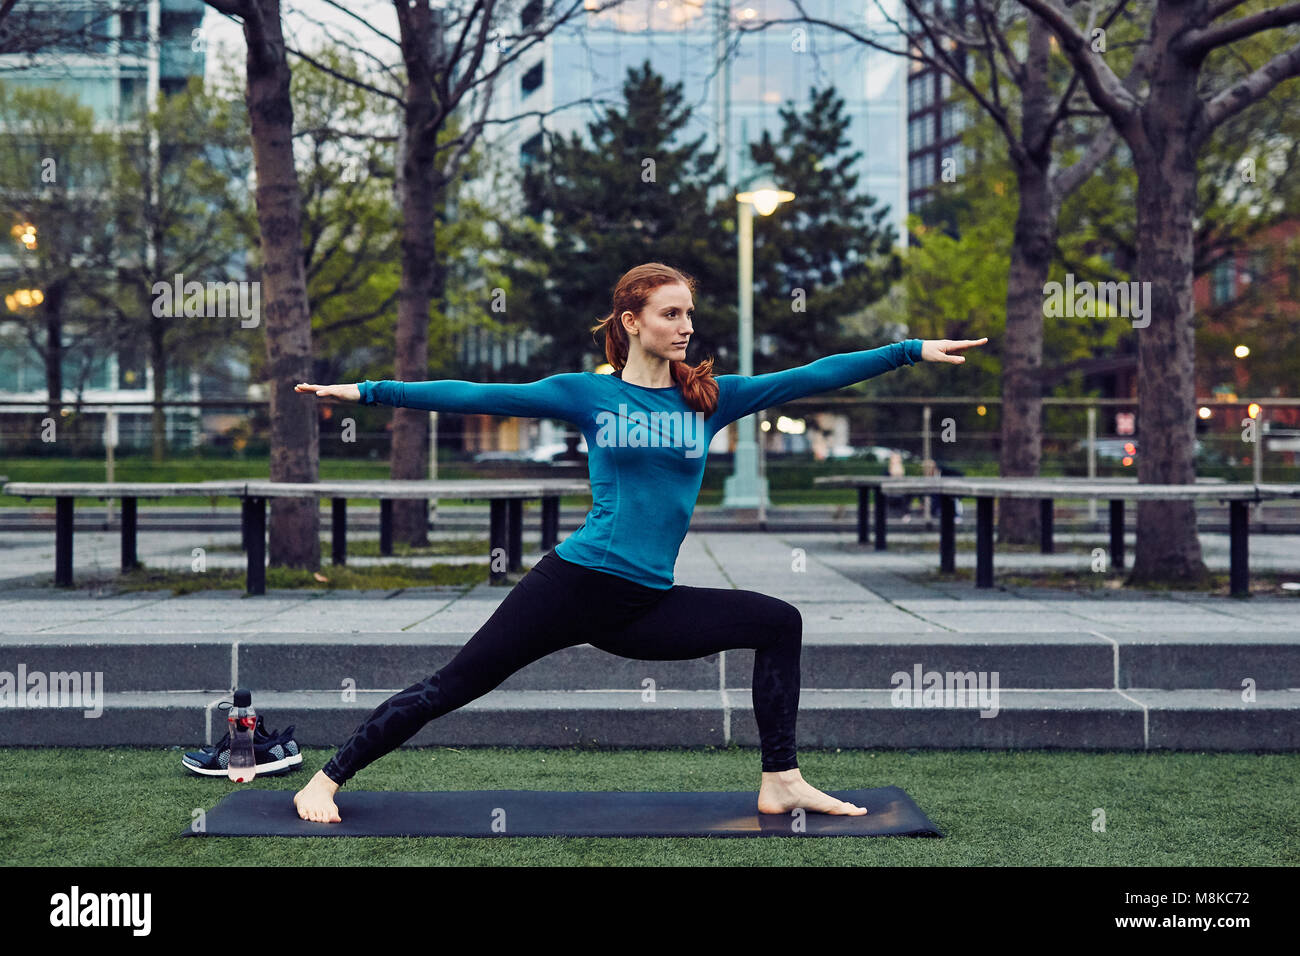 Caucasian Woman Performs Yoga in a Public New York City Park Stock Photo